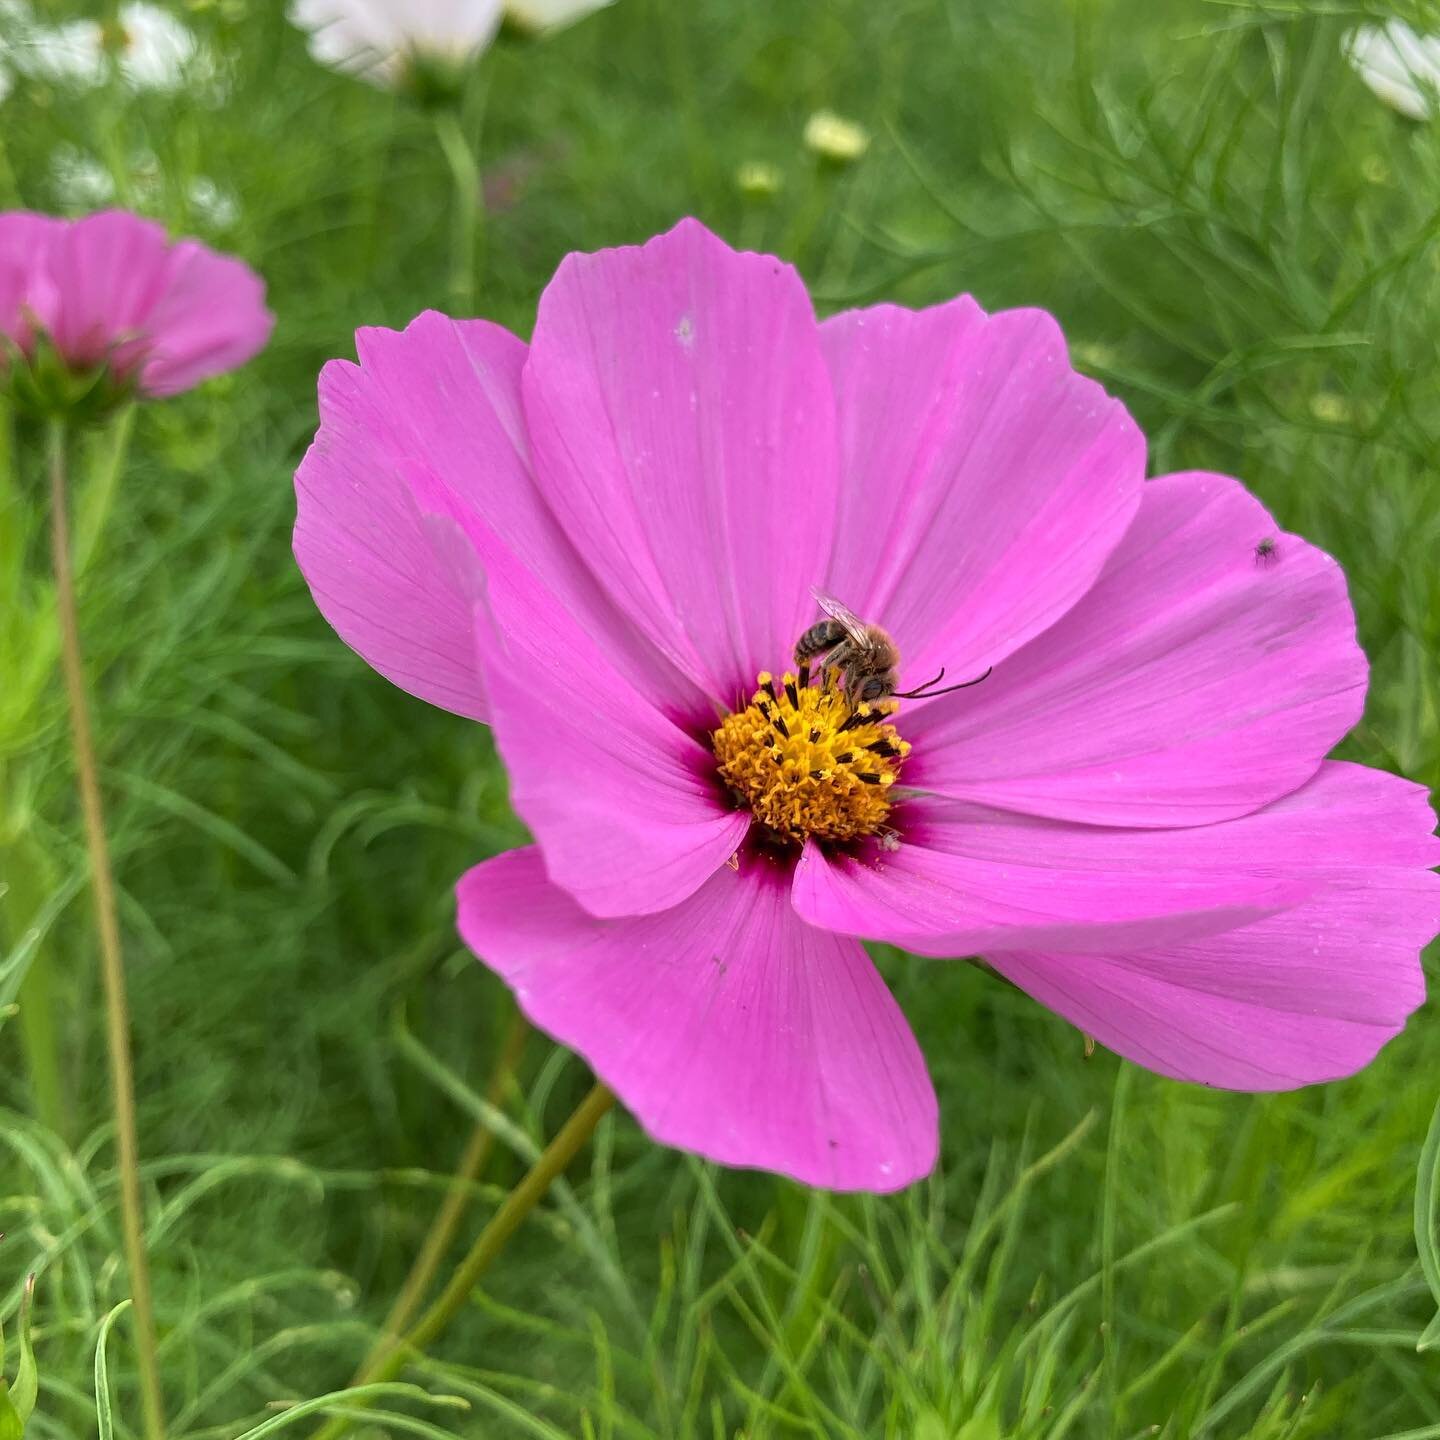 Cosmos. What a sweet little beauty. 

This week we have construction out in front of the farm. They are working on the railroad crossing. We are starting to feel the summer changing to fall. Cooler mornings, later sunrise, earlier sunset, quite a few